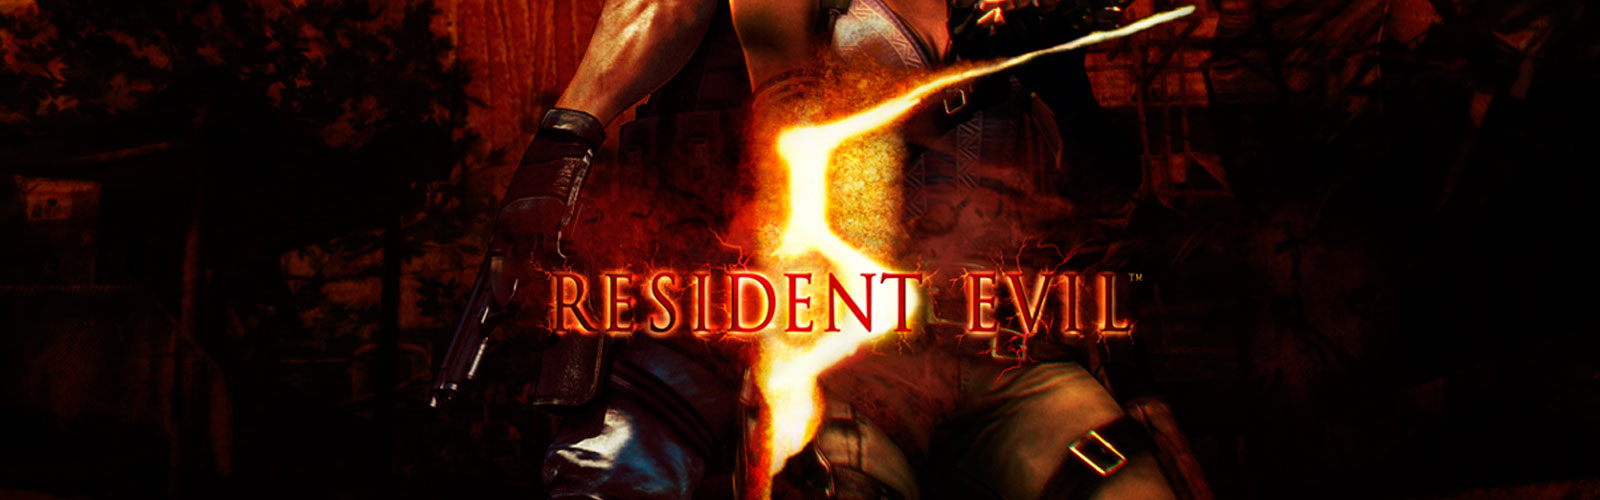 Resident Evil 5 Collector's Edition Cover